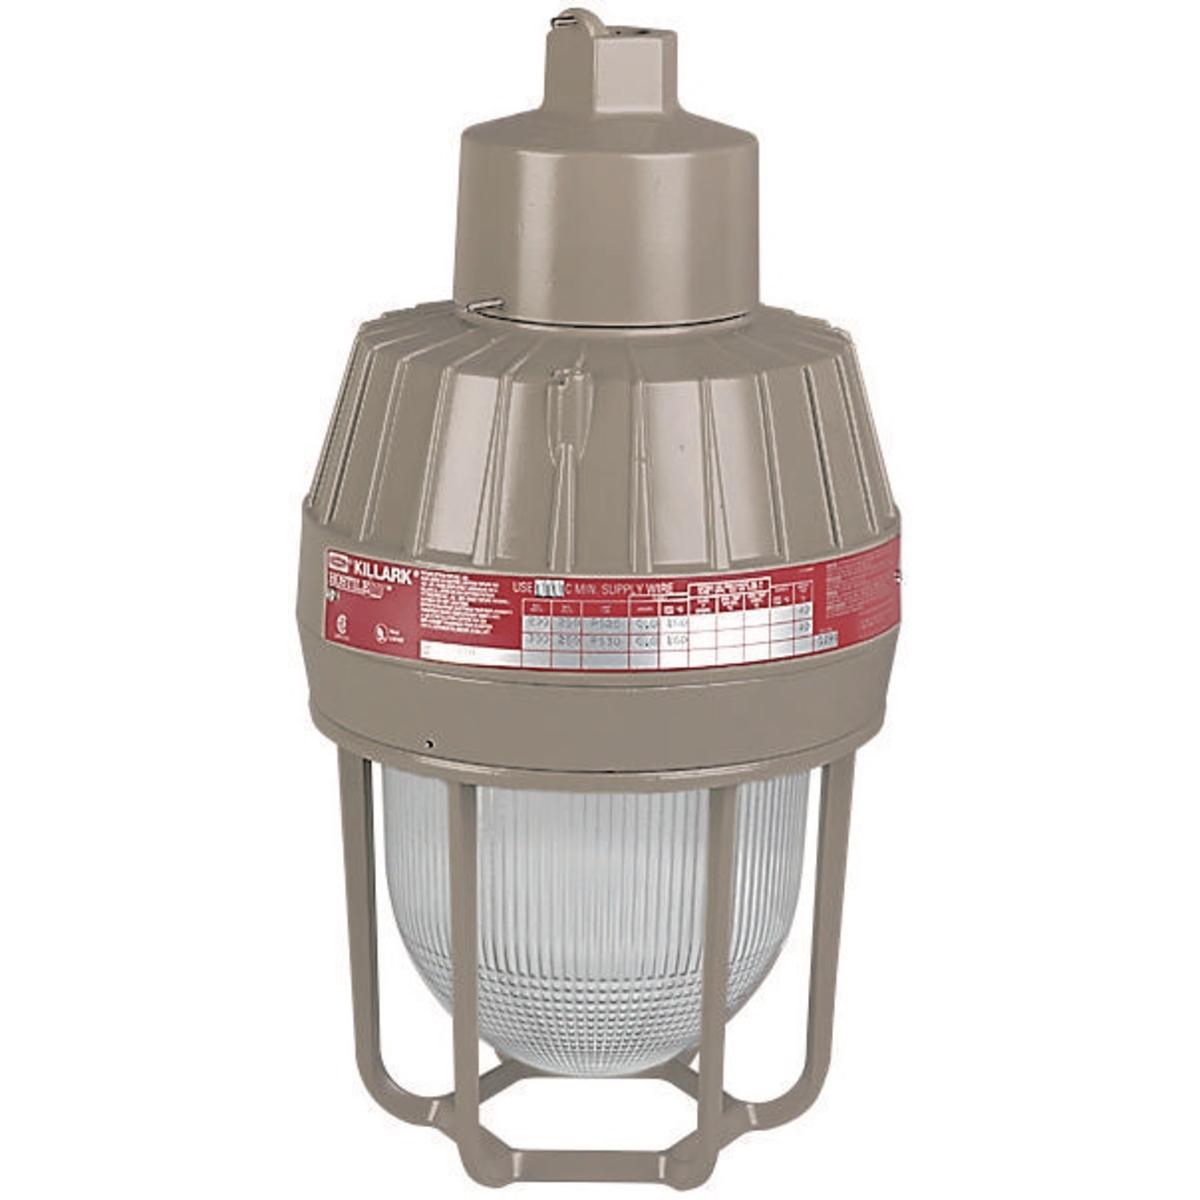 Hubbell EMI15A3 Incandescent 150W 1" Pendant  ; Four light sources—Incandescent, compact fluorescent, high pressure sodium and metal halide ; Mounting choice—Pendant, ceiling, 25˚ stanchion or 90˚ wall mount, all with “wireless” design that allows fast, easy fixture inst